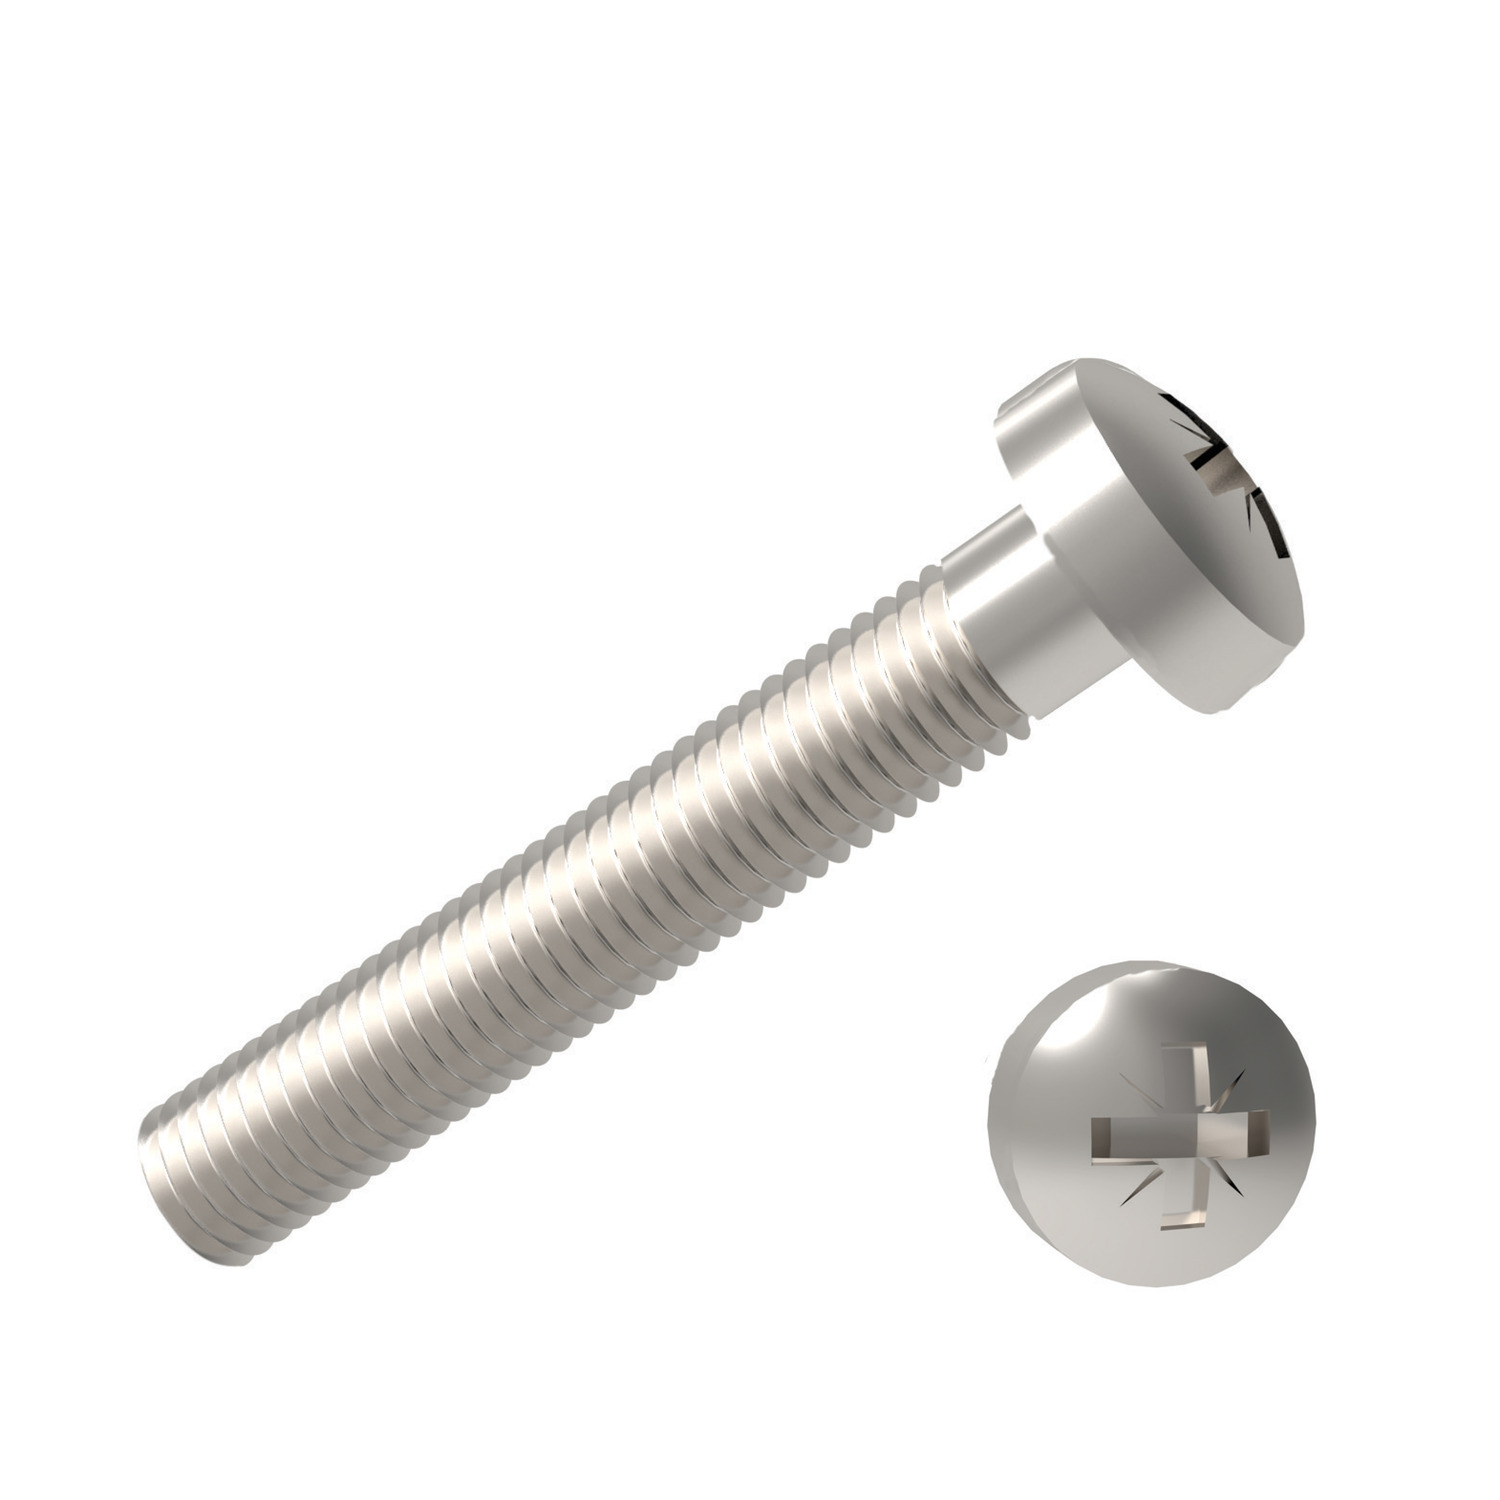 Pozi Pan Head Screws Stainless Steel A2. To DIN 7985 Z, ISO 7045. Threaded within 2,5 x pitch of head.